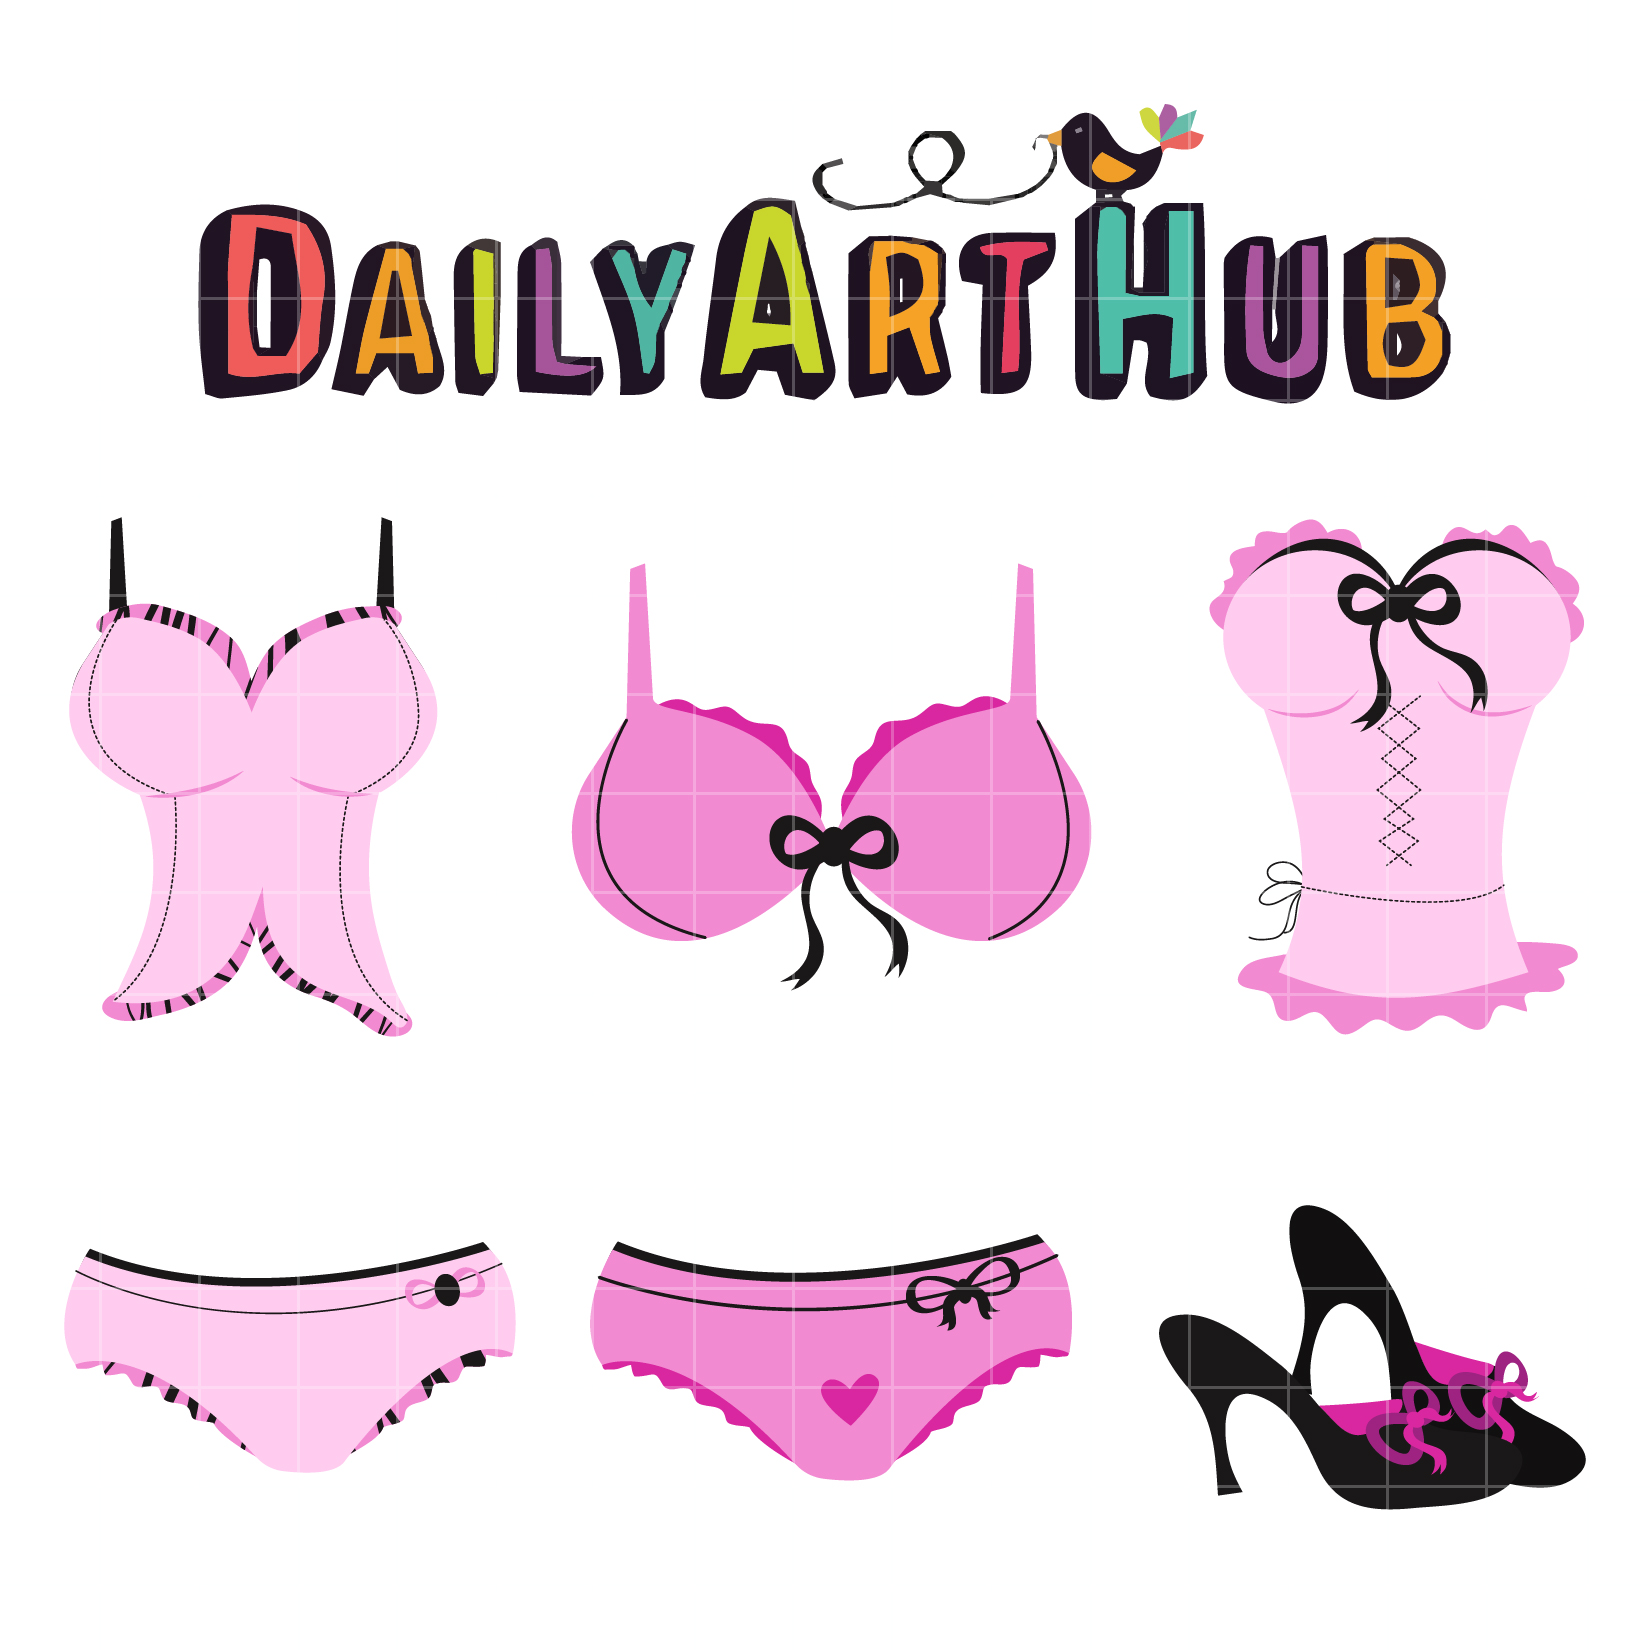 Pink Bra Cliparts, Stock Vector and Royalty Free Pink Bra Illustrations